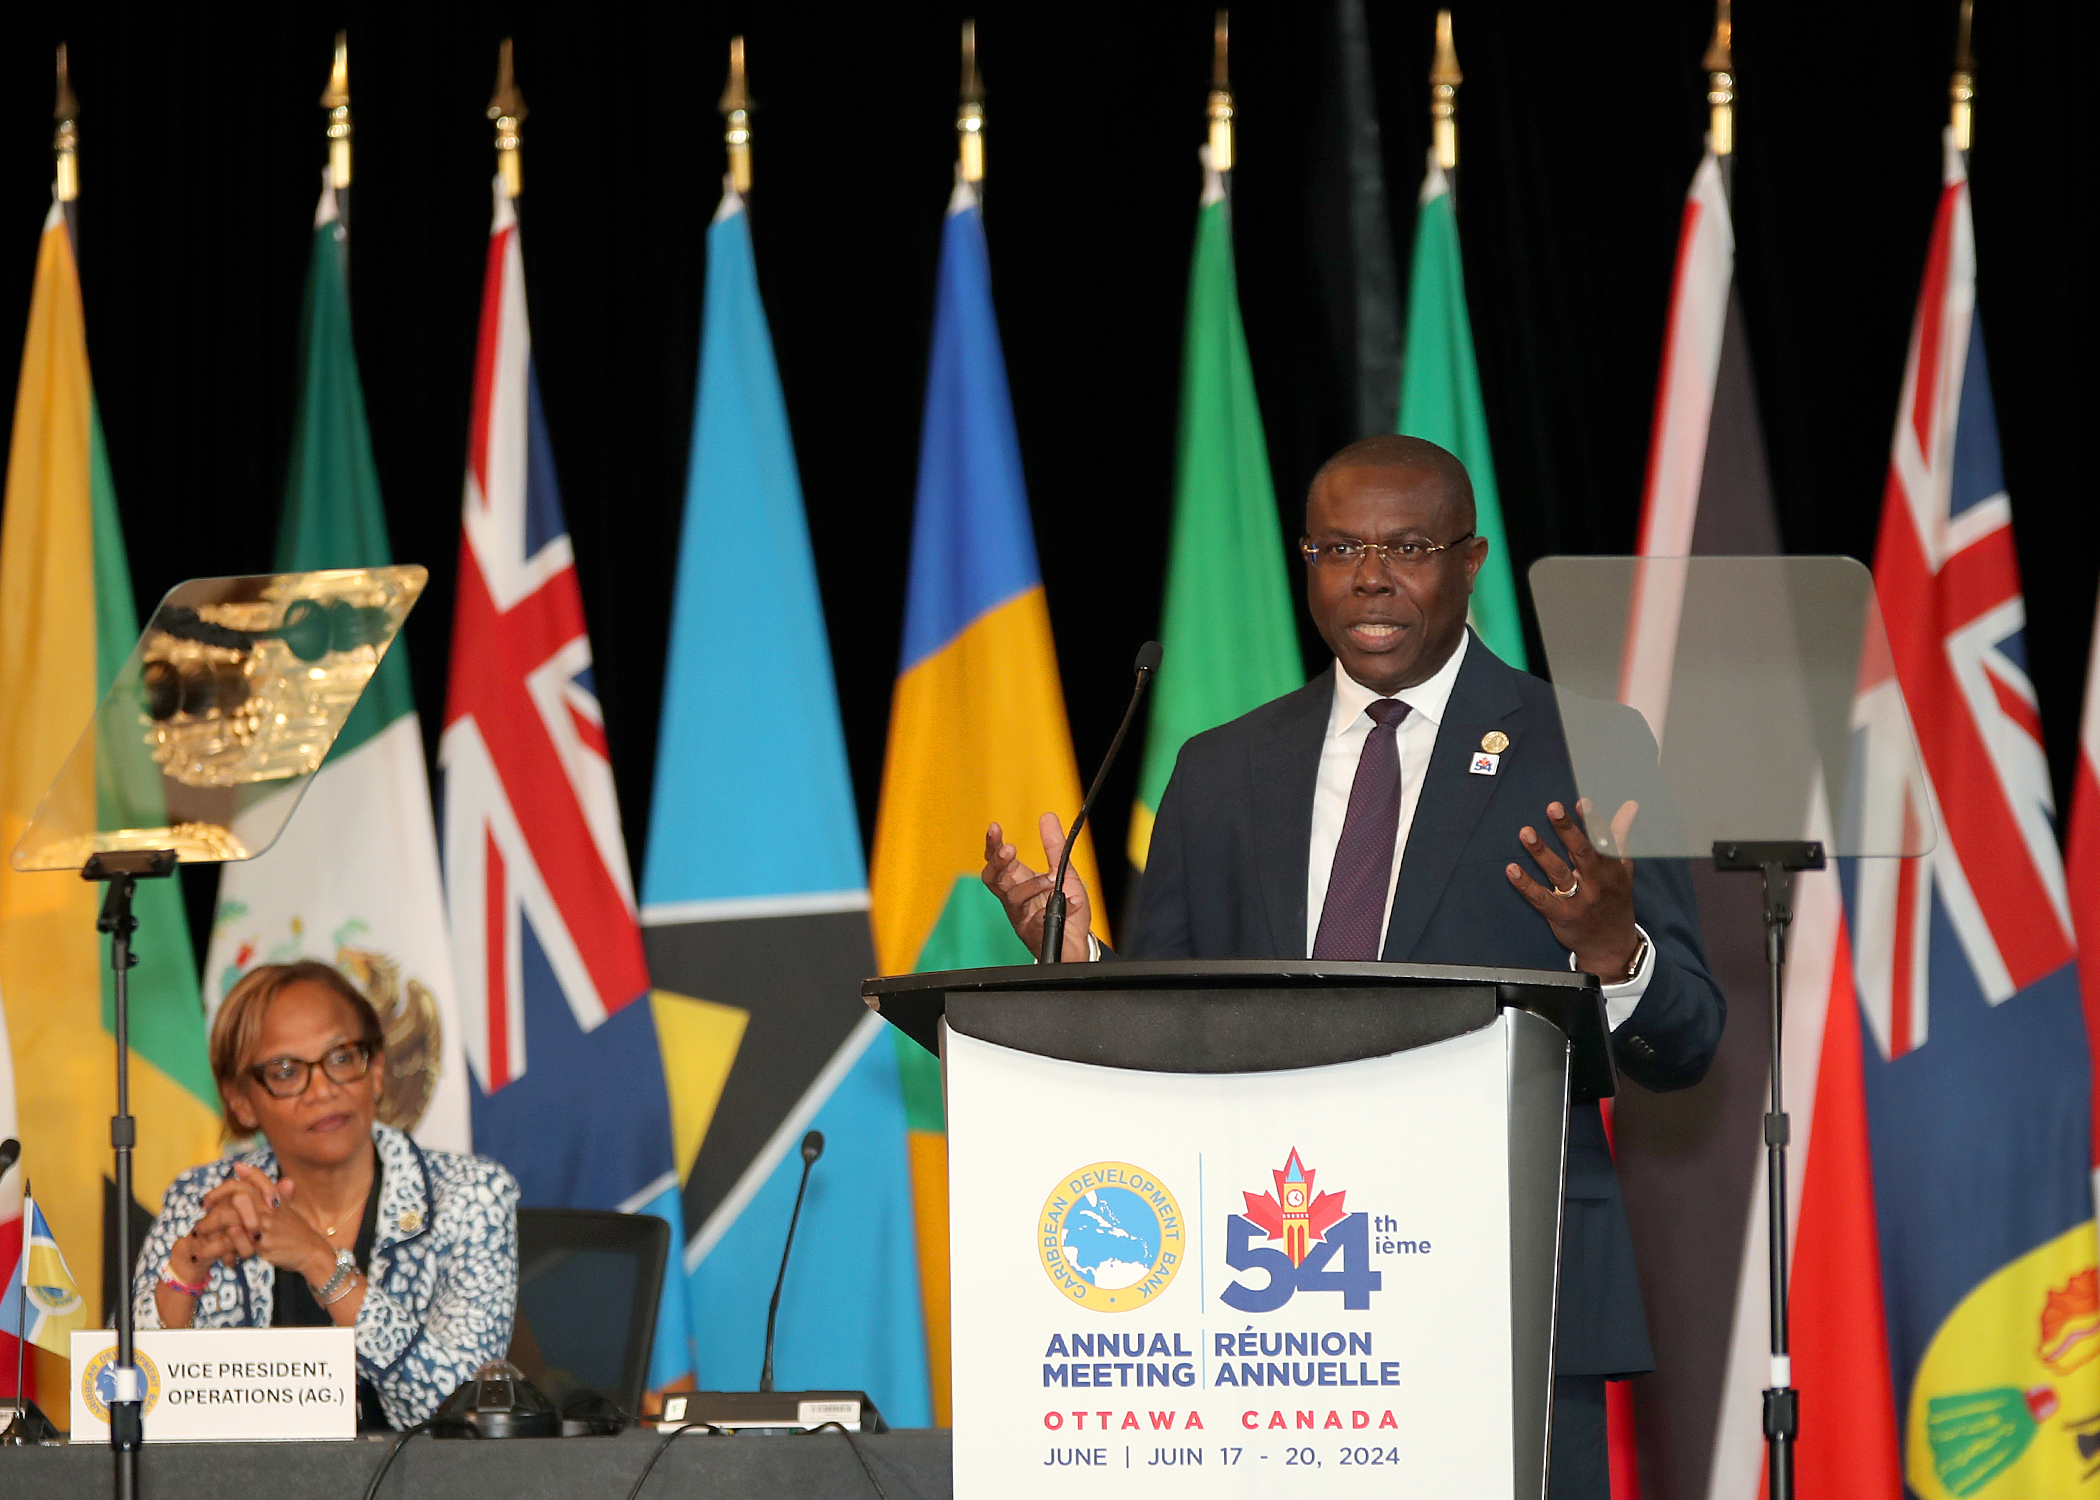 A man stands on a platform behind a lectern with the logo and words Caribbean Development Bank 54th with several flags behind him